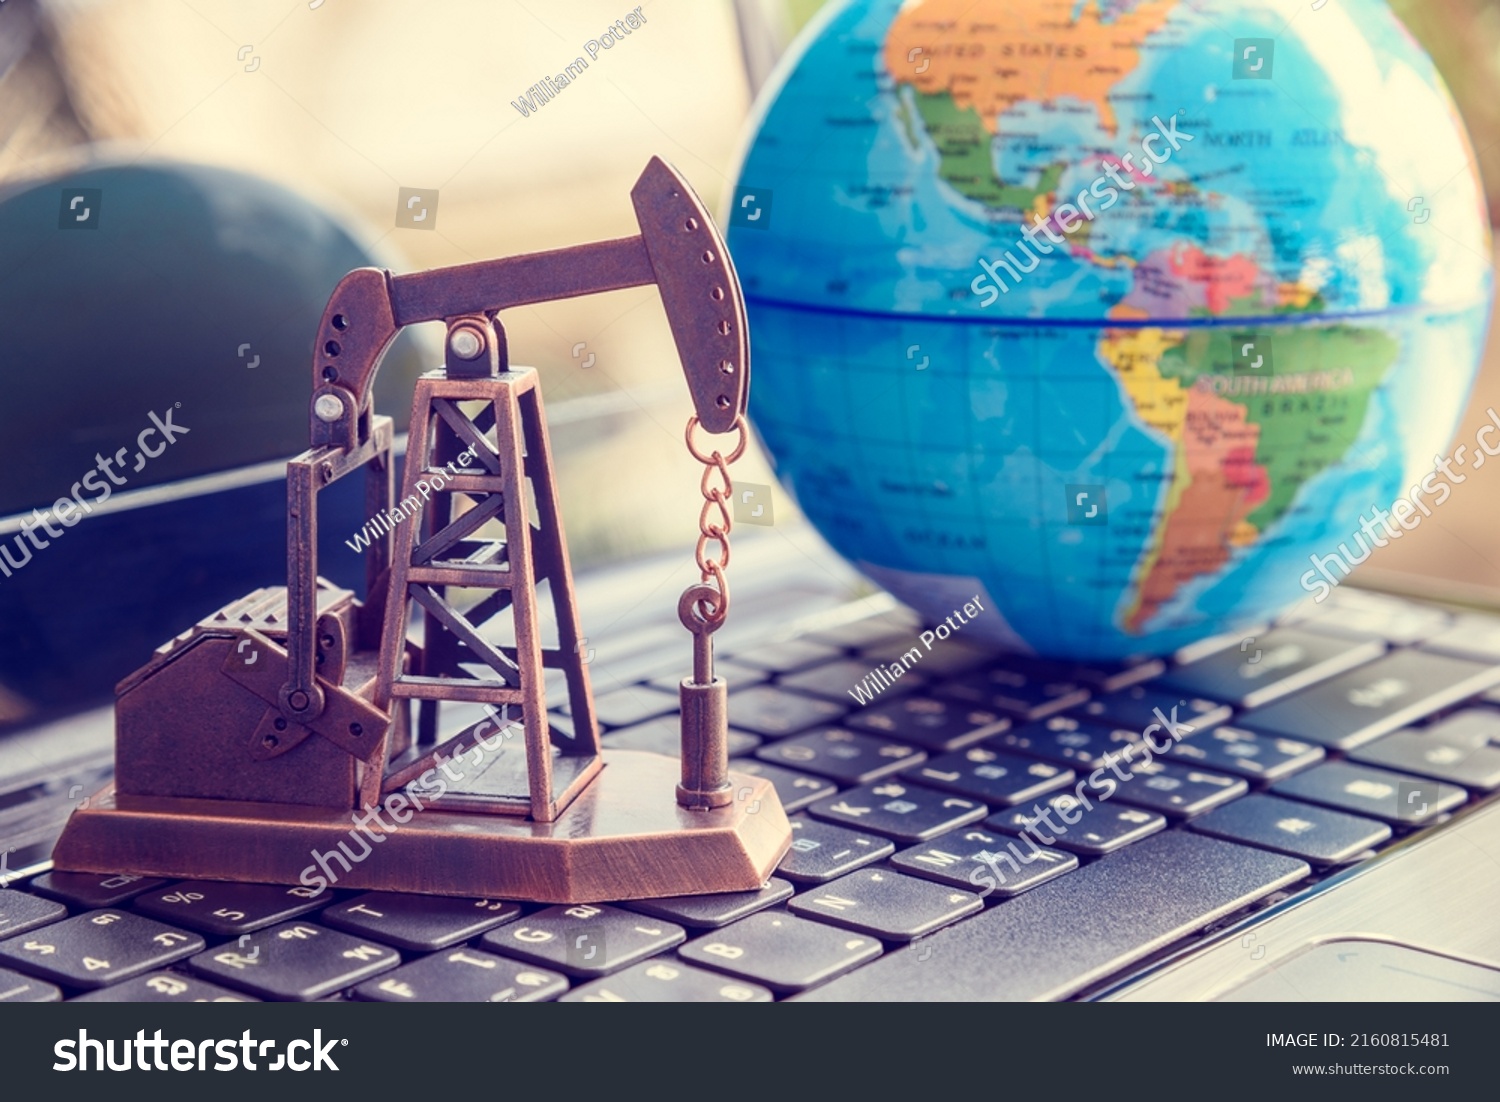 Petroleum and crude oil concept : Oil rig or a pumpjack and world globe on a laptop, depicting investment and development or production and manufacturing of global oil industry around the world. #2160815481